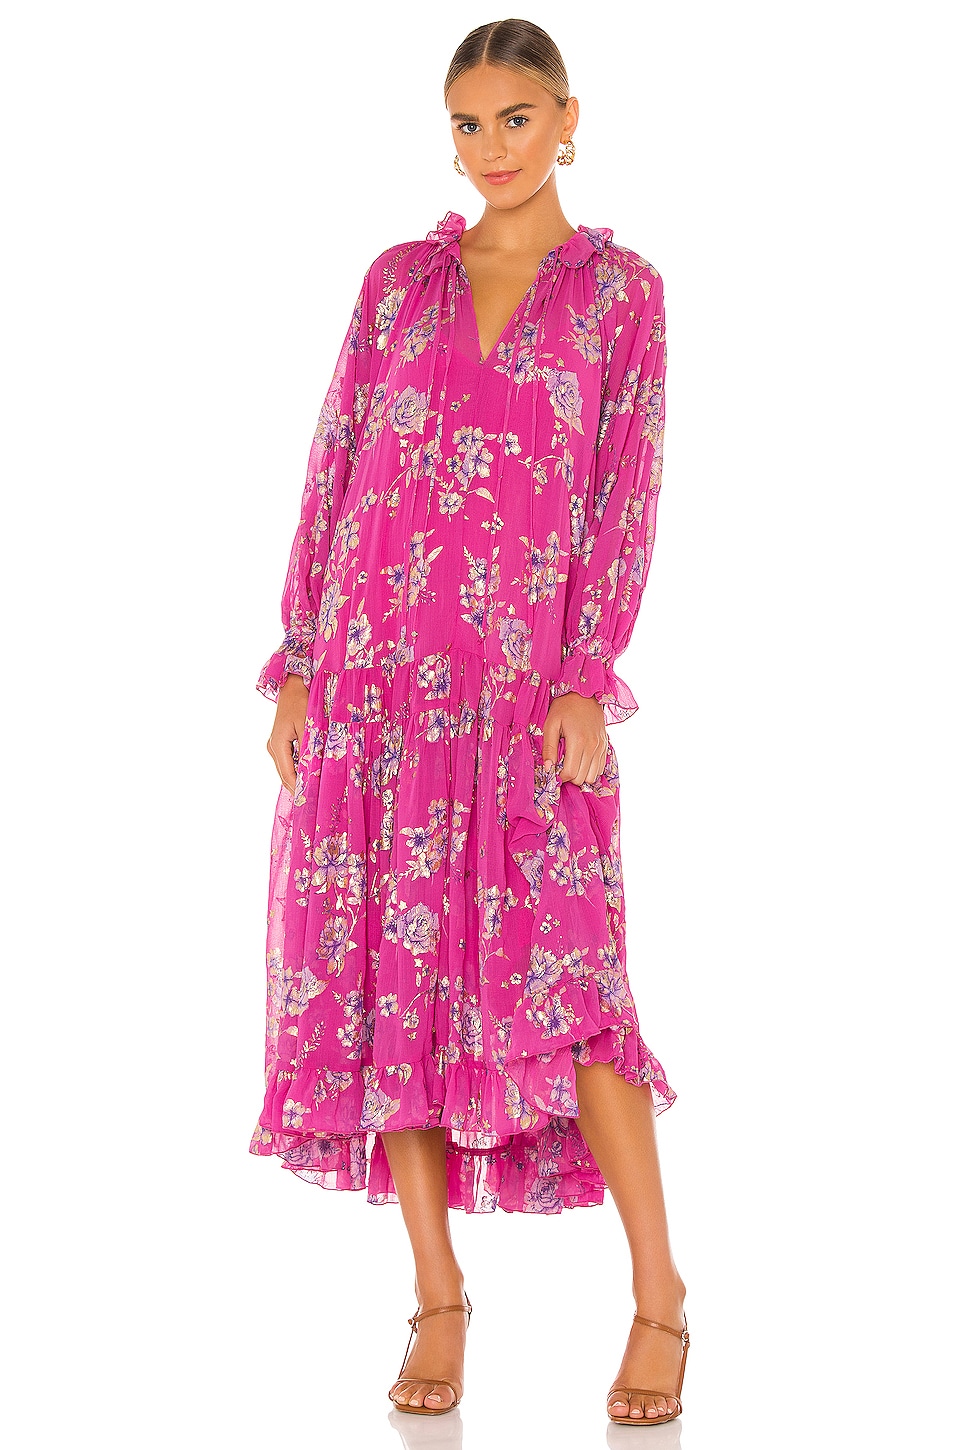 Free People Feeling Groovy Maxi Foil Dress in Hot Pink Combo | REVOLVE